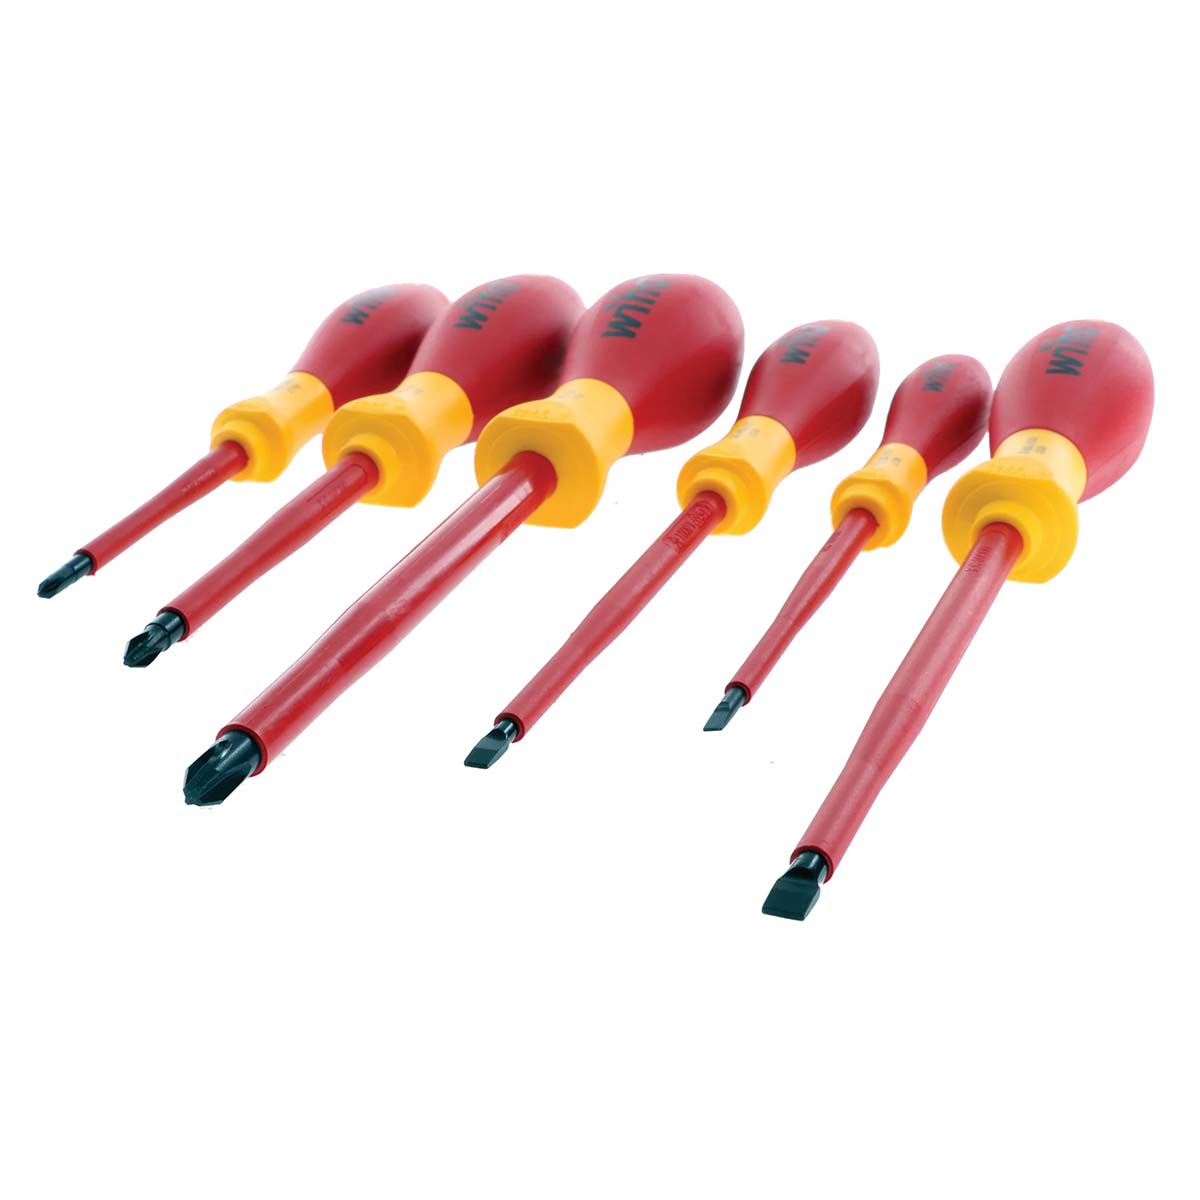 Wiha Insulated Softfinish Slotted And Phillips Screwdriver Set - 6 Piece Set